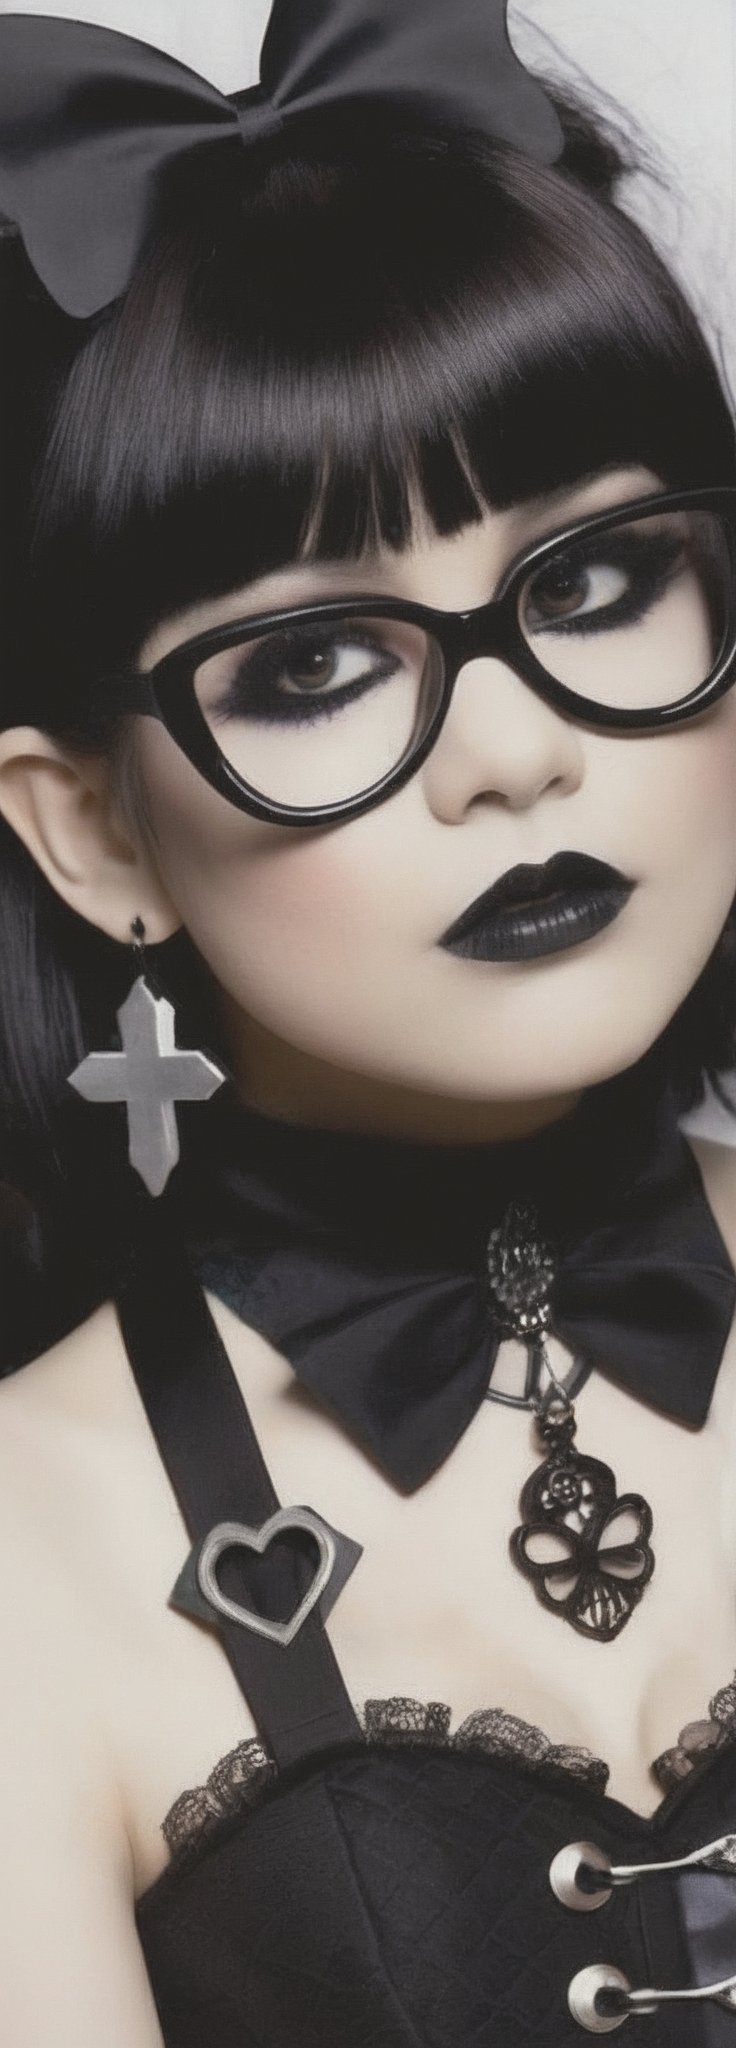 1girl, Velma Dinkley as a Catholicpunk cute goth girl in a fusion of Japanese-inspired Gothic punk fashion, glasses, skulls, goth. Huge cleavage, 
 black gloves, tight corset, black tie, incorporating traditional Japanese motifs and punk-inspired details,Emphasize the unique synthesis of styles, flowers, butterflies, score_9, score_8_up ,heavy makeup, earrings, Lolita Fashion Clothes, kawaii, hearts ,emo, kawaiitech, dollskill,chibi, score_7_up,Eyes